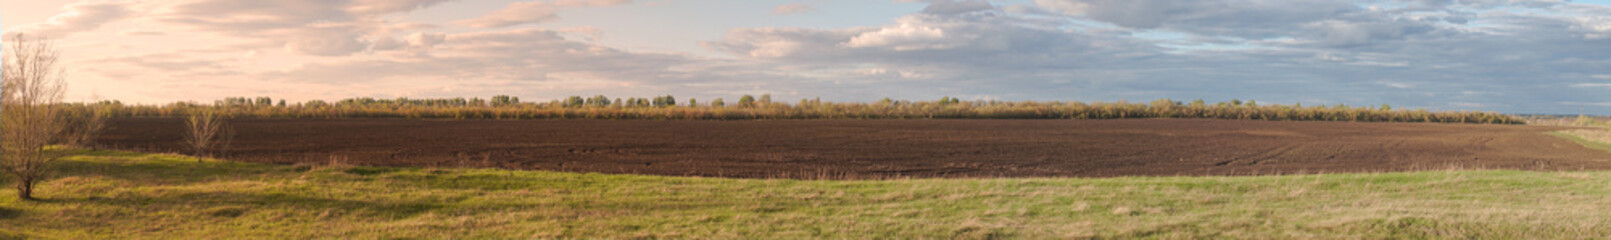 Panorama of a plowed agricultural field under a cloudy sky in front of a forest